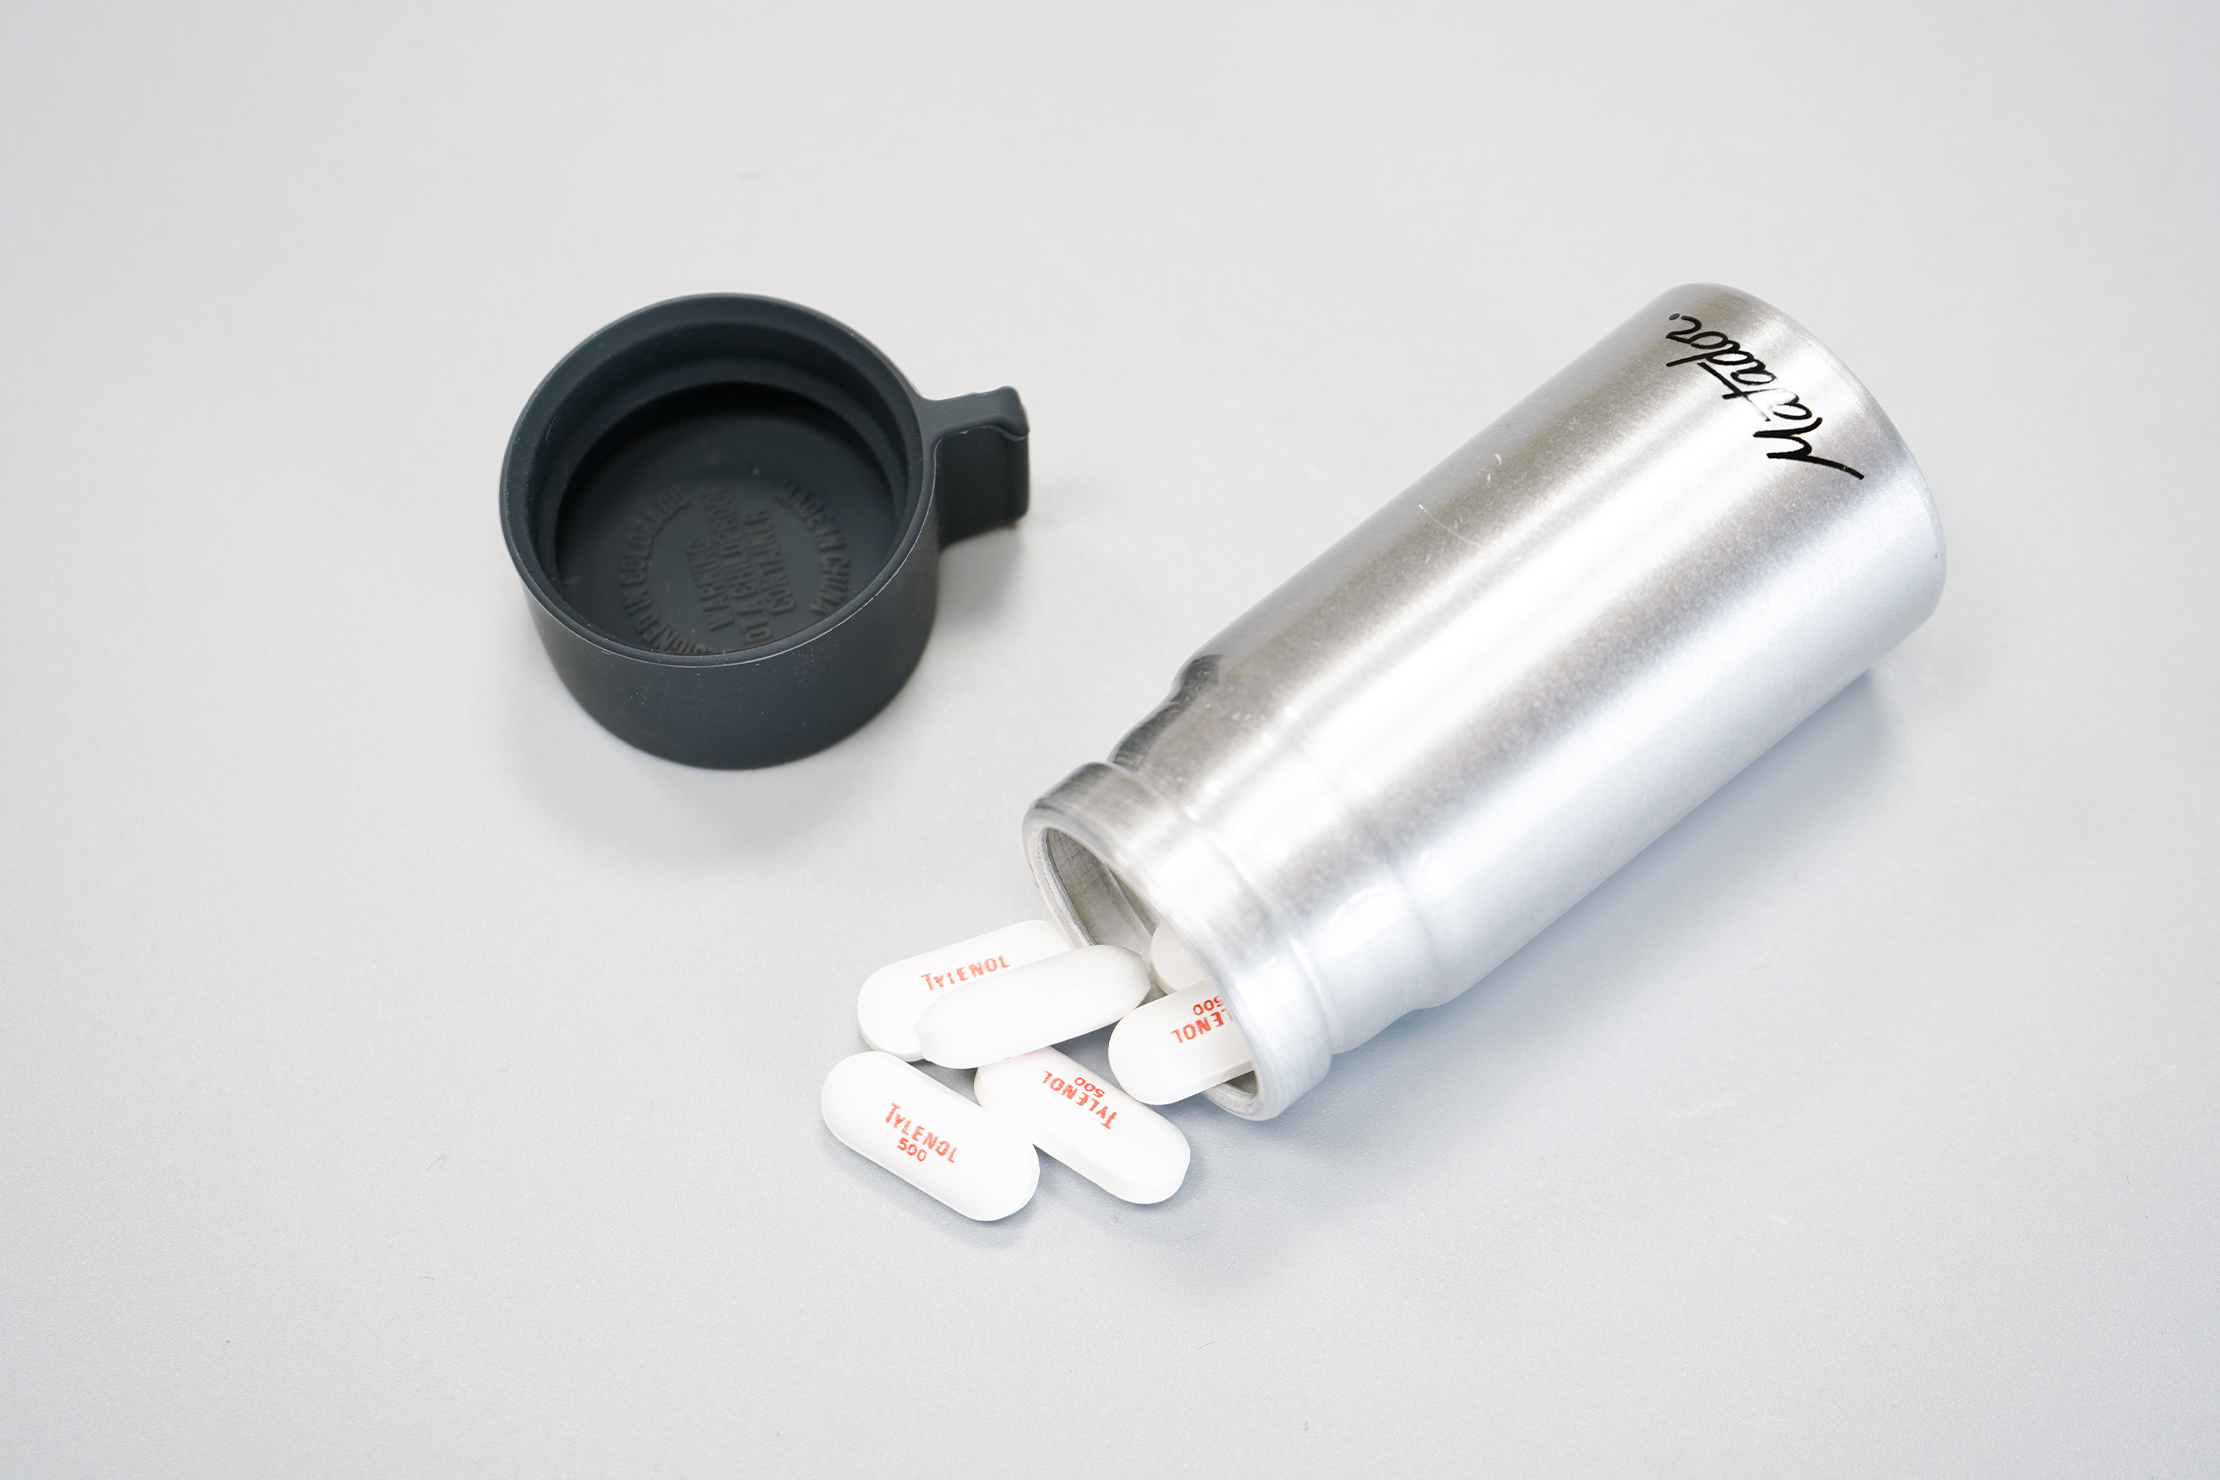 Matador Waterproof Travel Canisters | As a pill canister